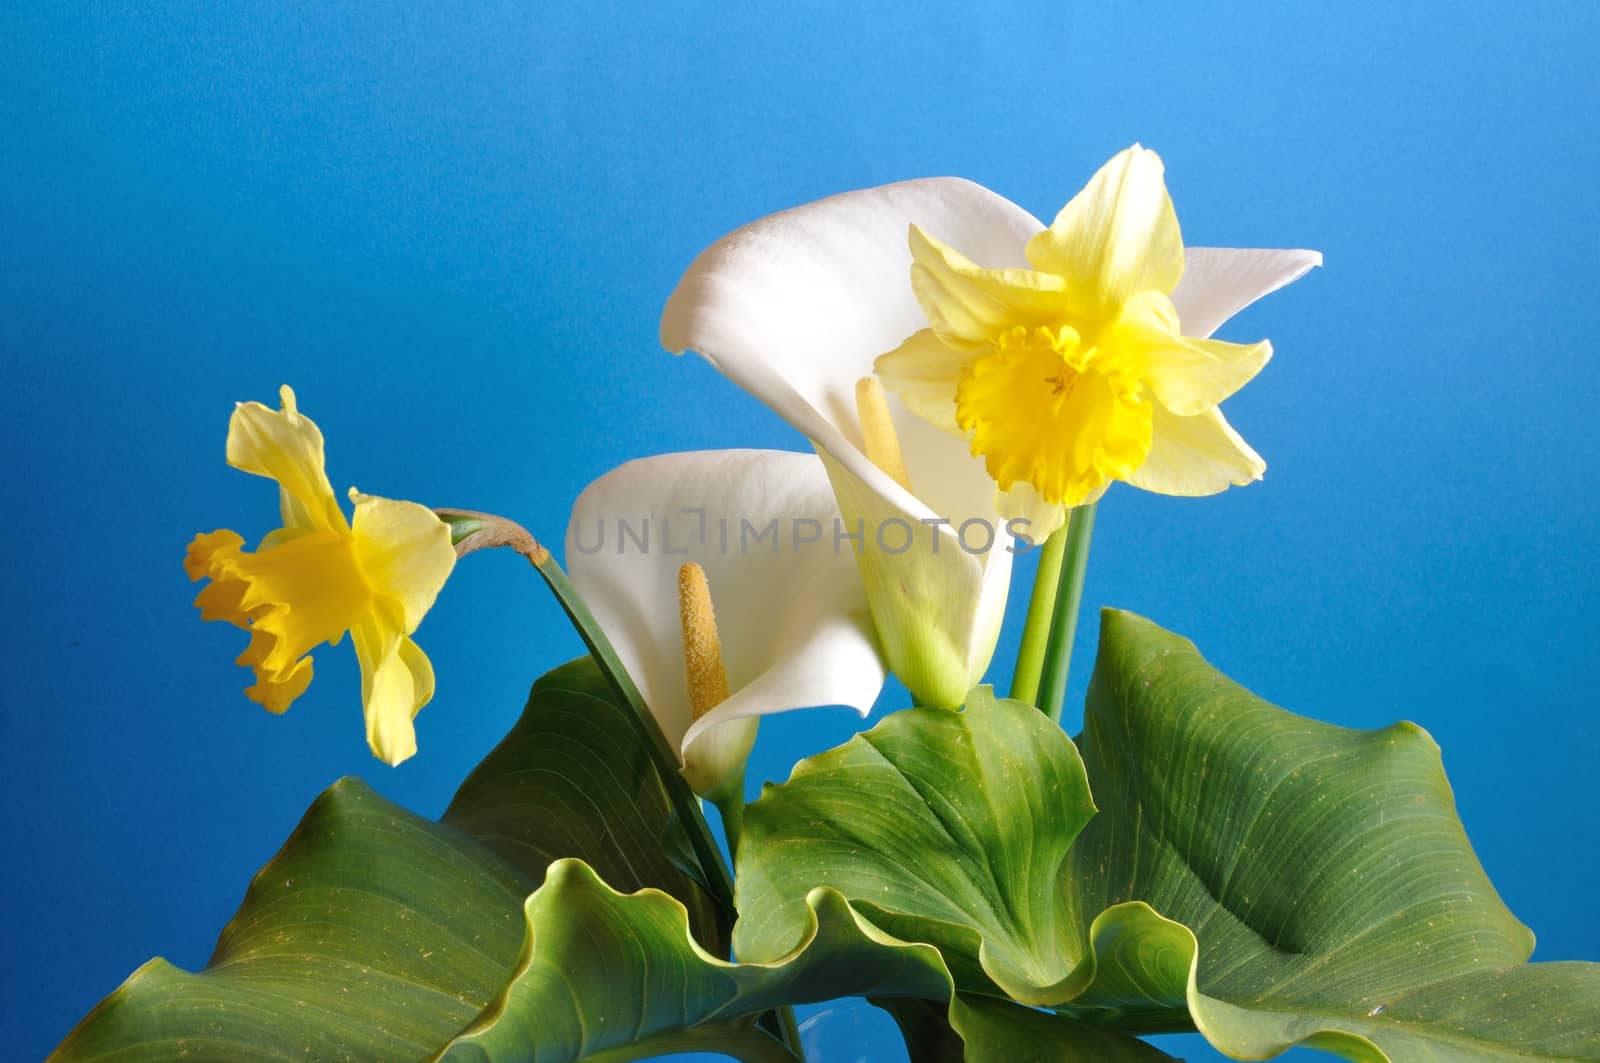 Arum lilies and daffodils